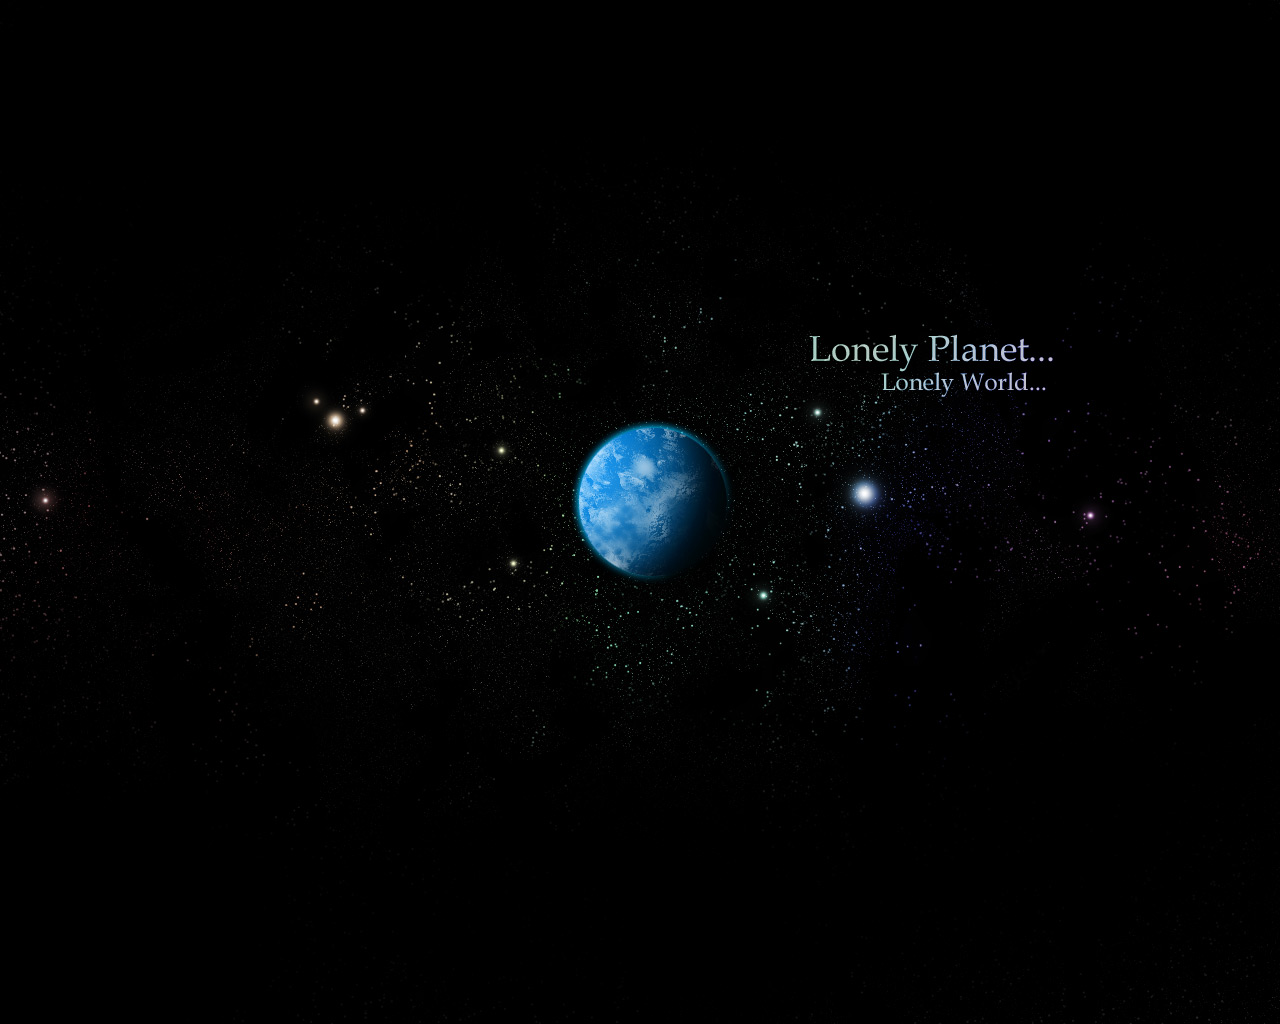 Lonely Planet, Lonely World by bluelance on DeviantArt